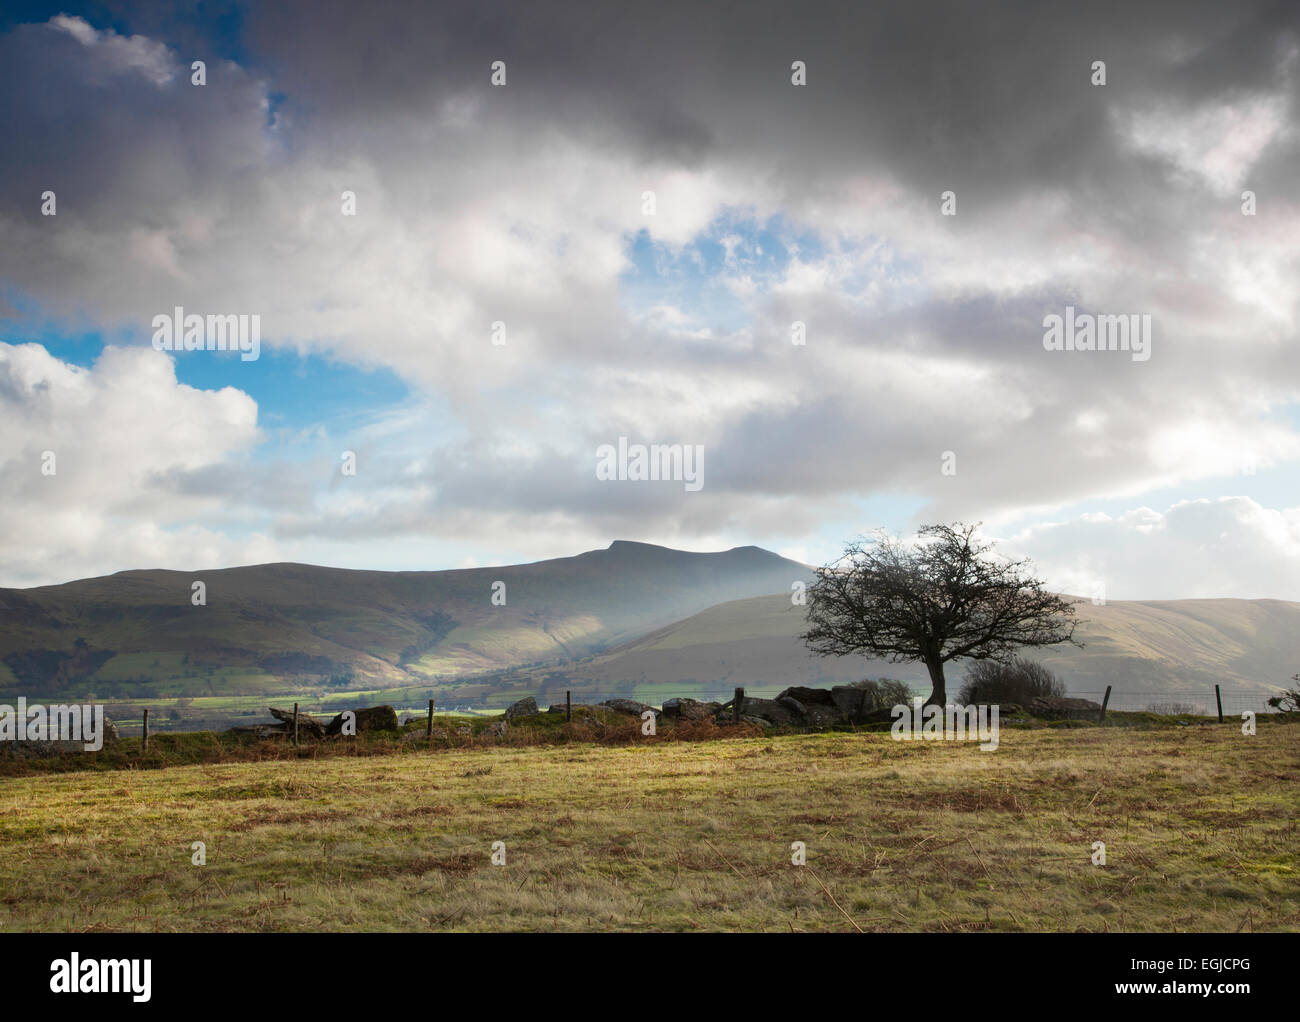 Brecon Beacons mountains of Pen Y Fan and Corn Du, in Wales behind sillhouetted tree, with bright sun and stormy skies. Stock Photo